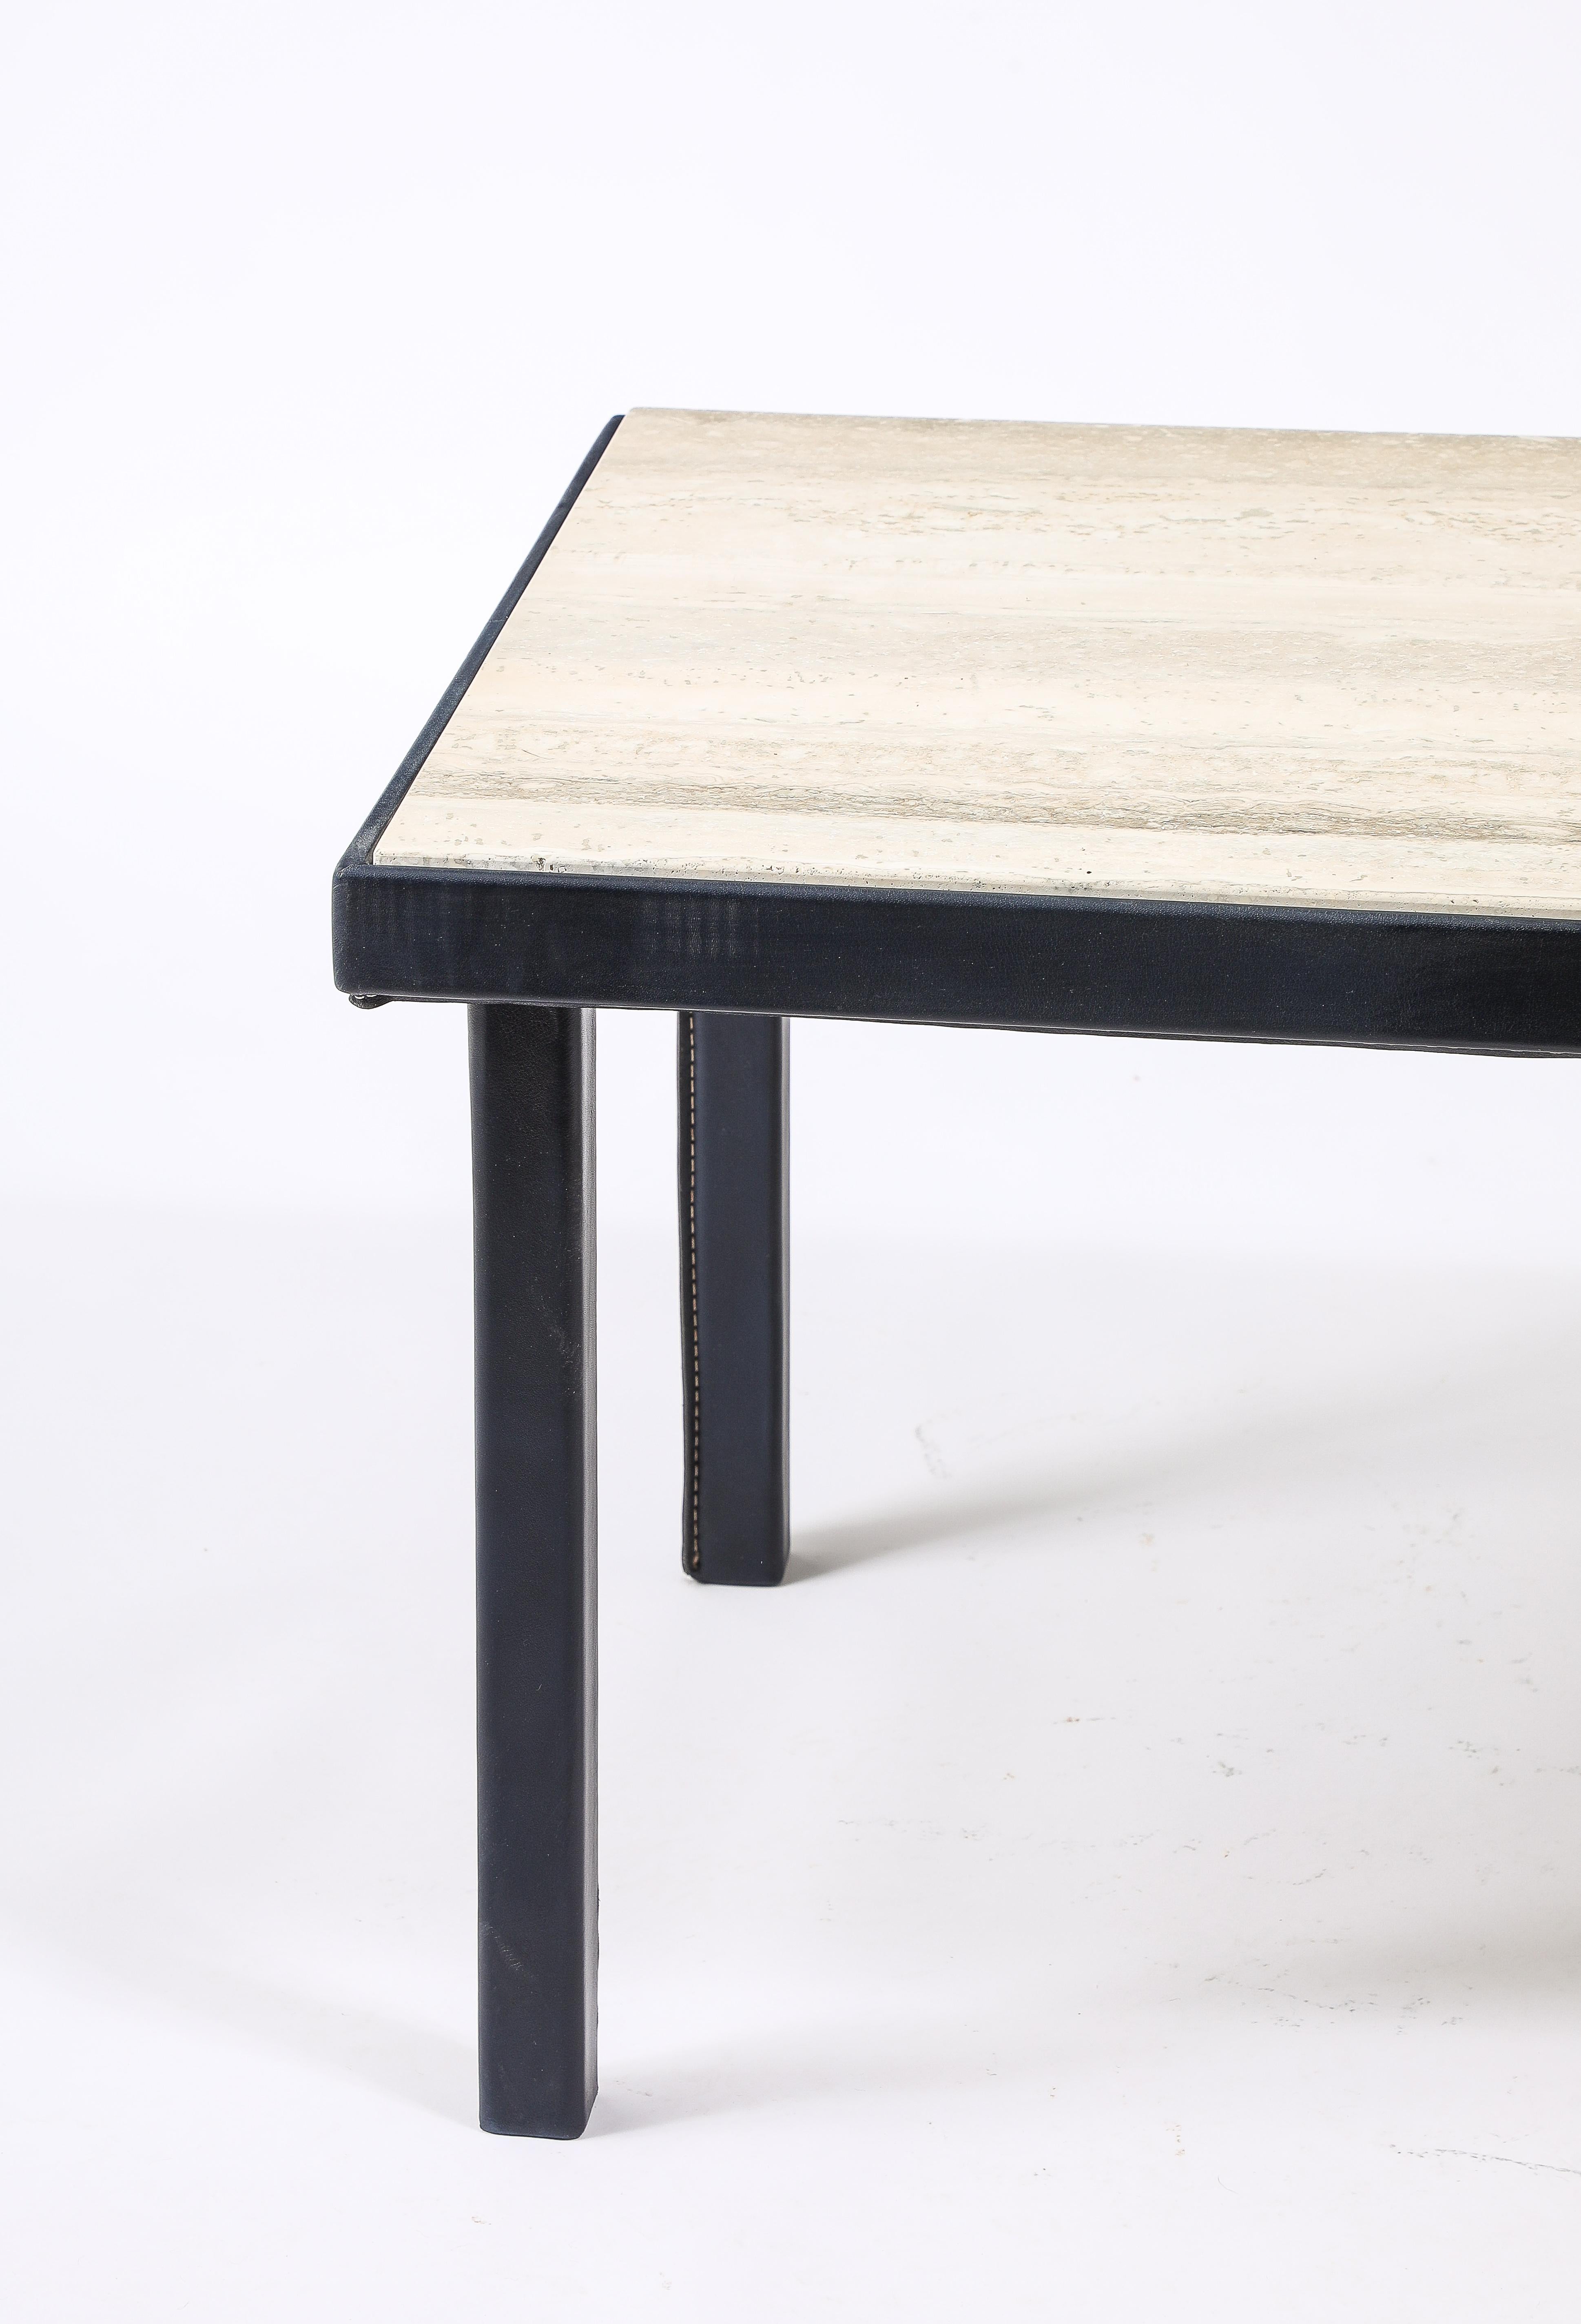 Jacques Adnet Stitched Blue Leather & Travertine Coffee Table, France 1950's For Sale 5